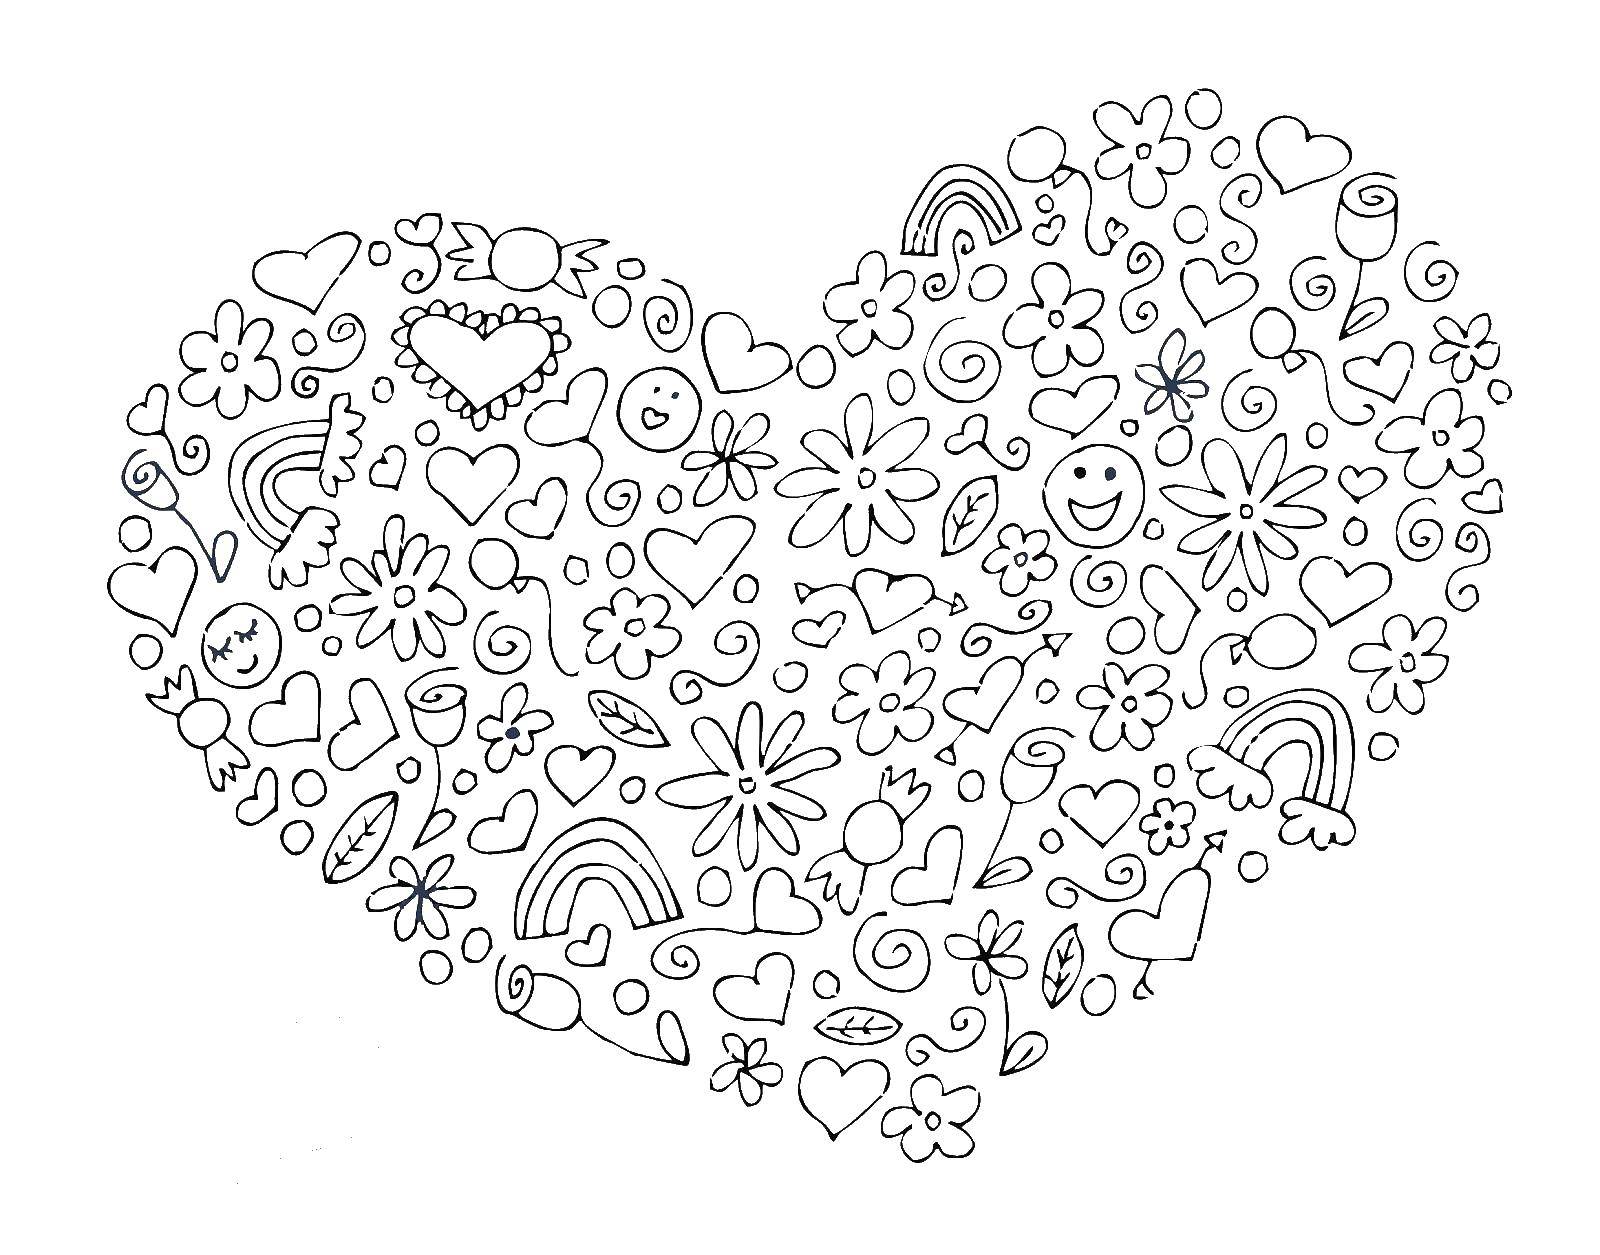 Coloring Heart drawings. Category Hearts. Tags:  heart, shape, patterns, love, drawings.